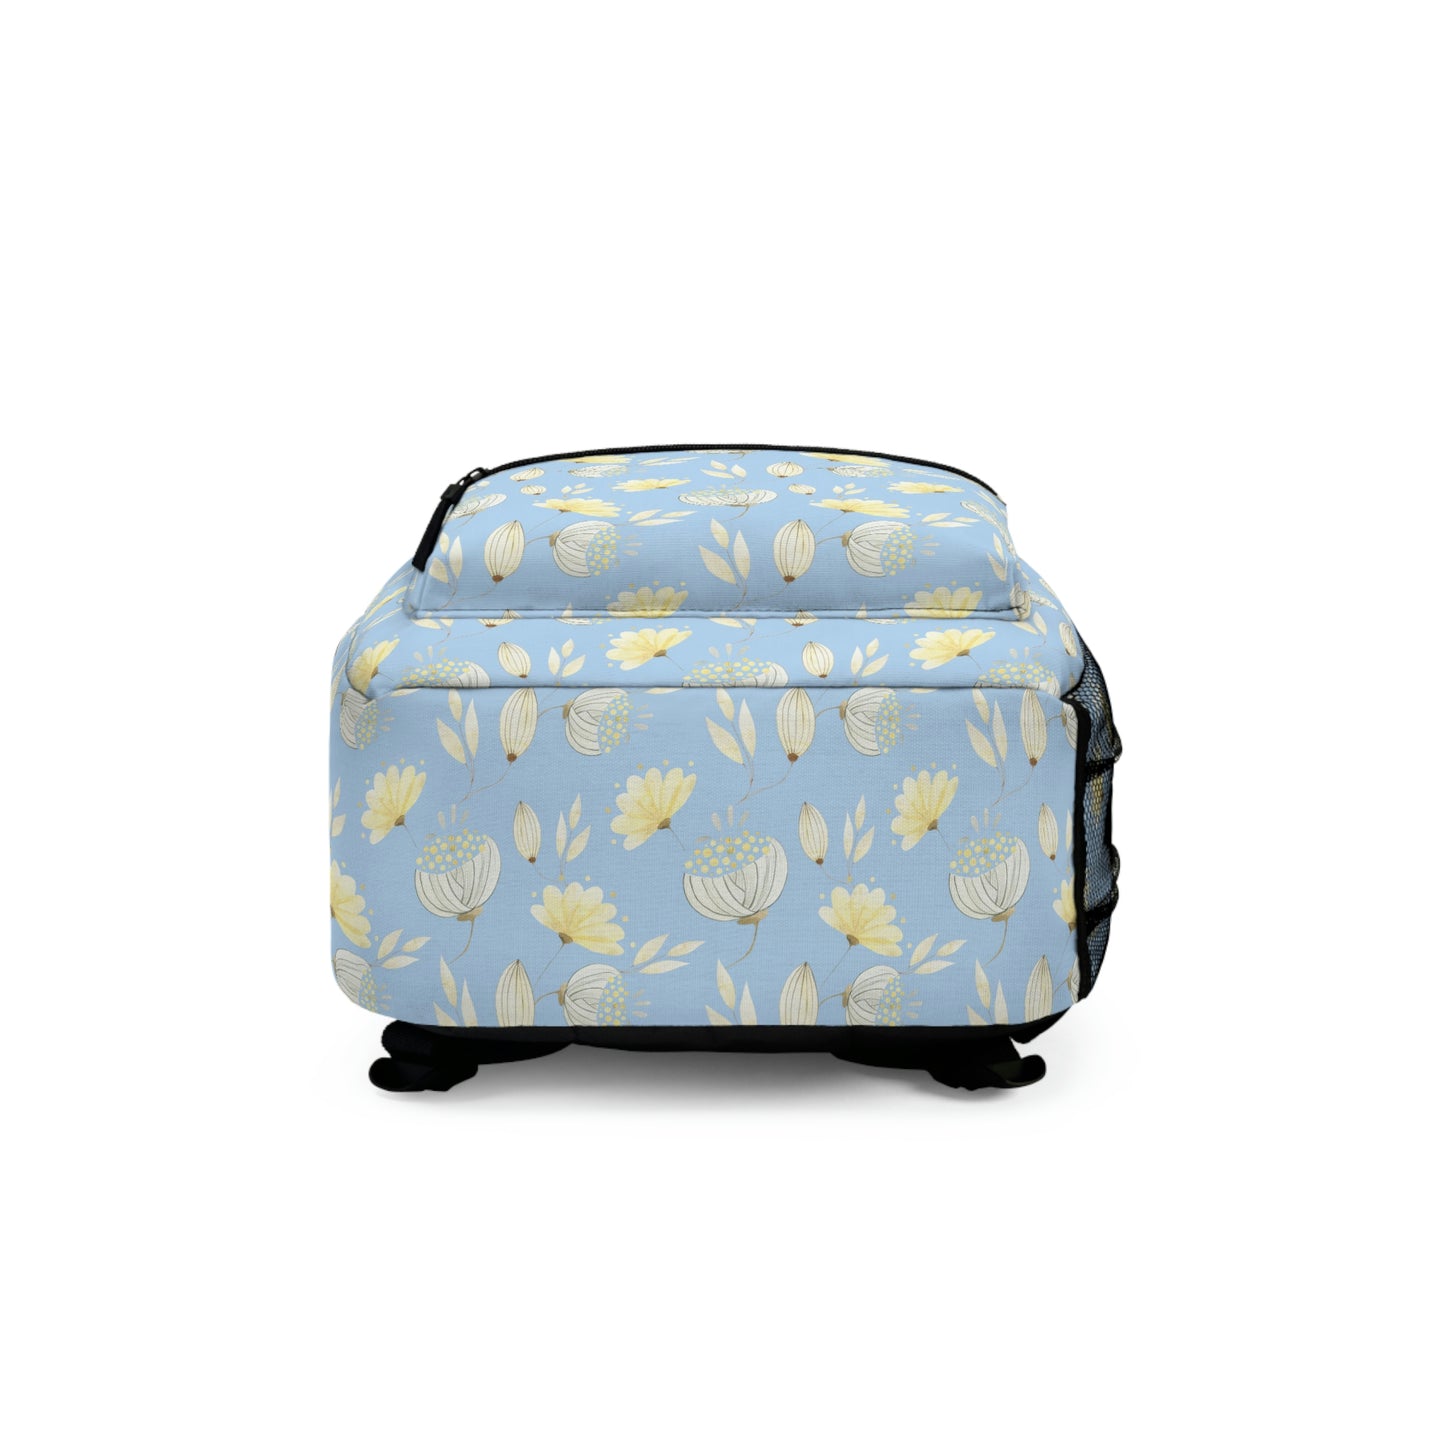 Yellow Flowers Backpack